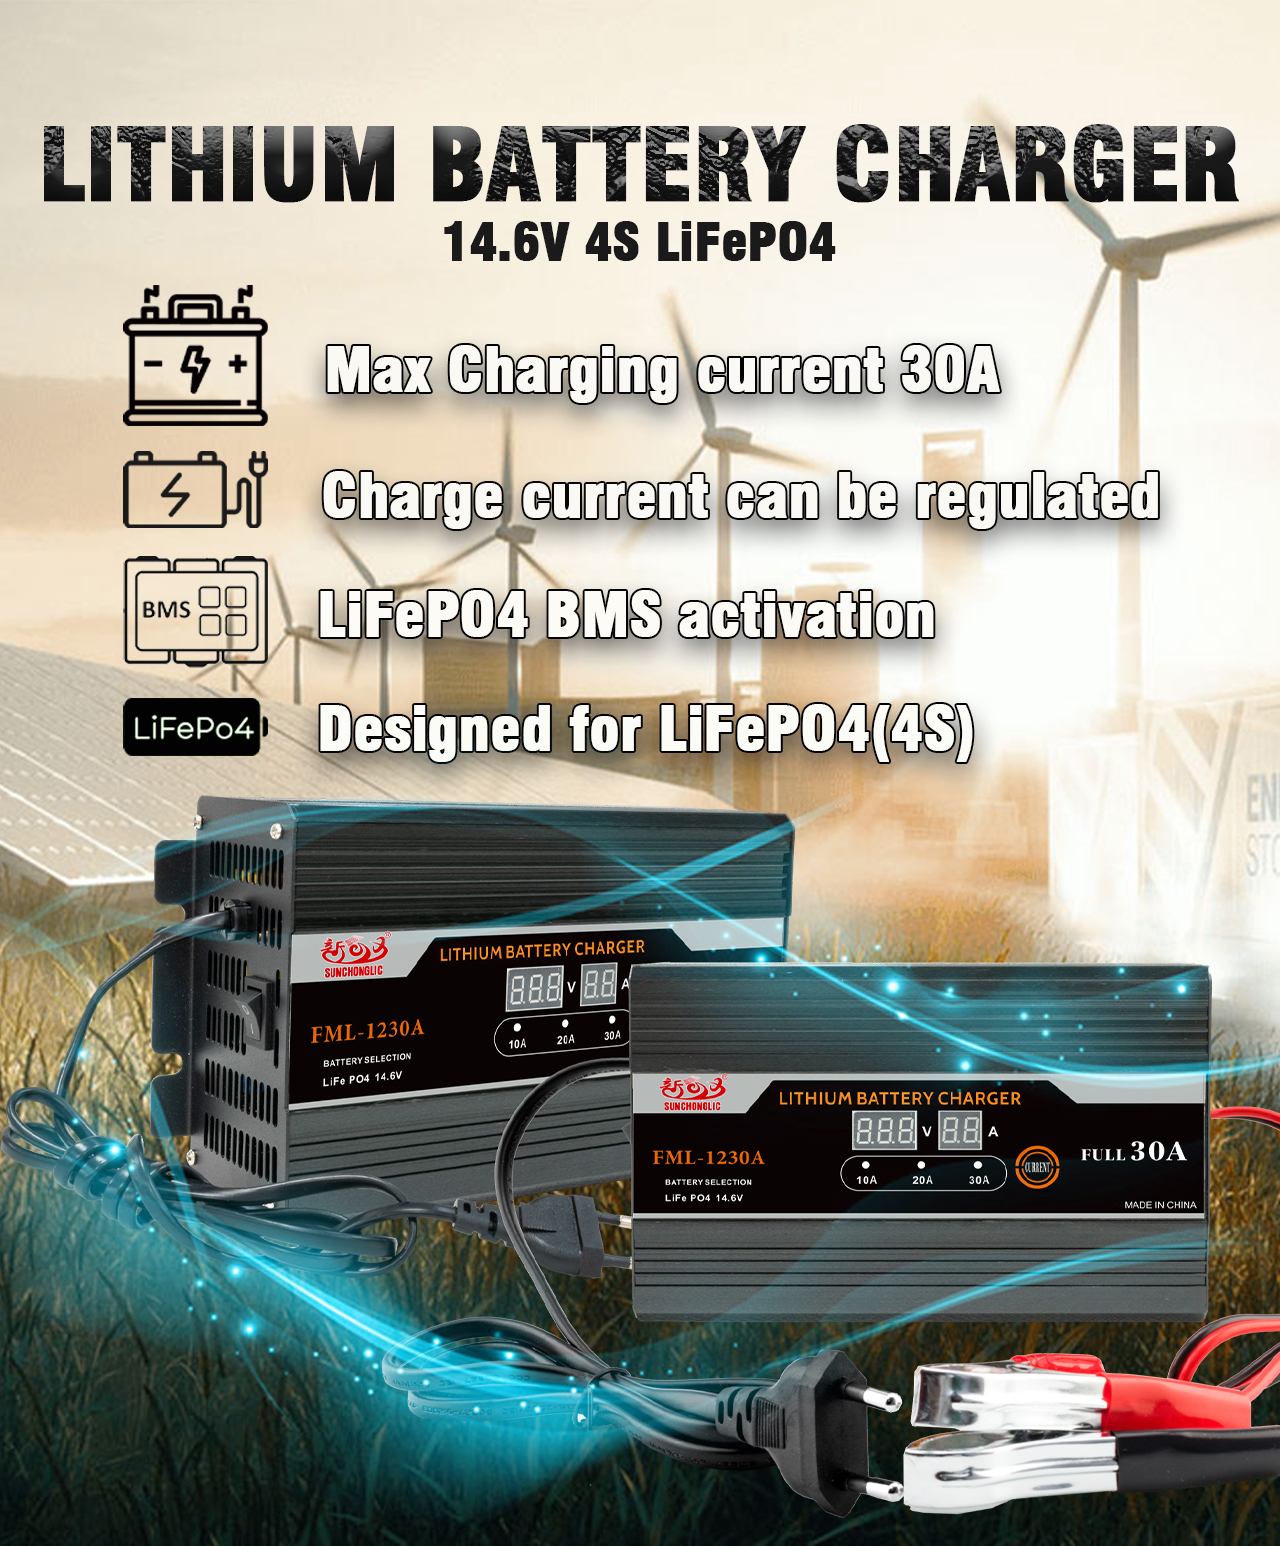 Lithium battery charger